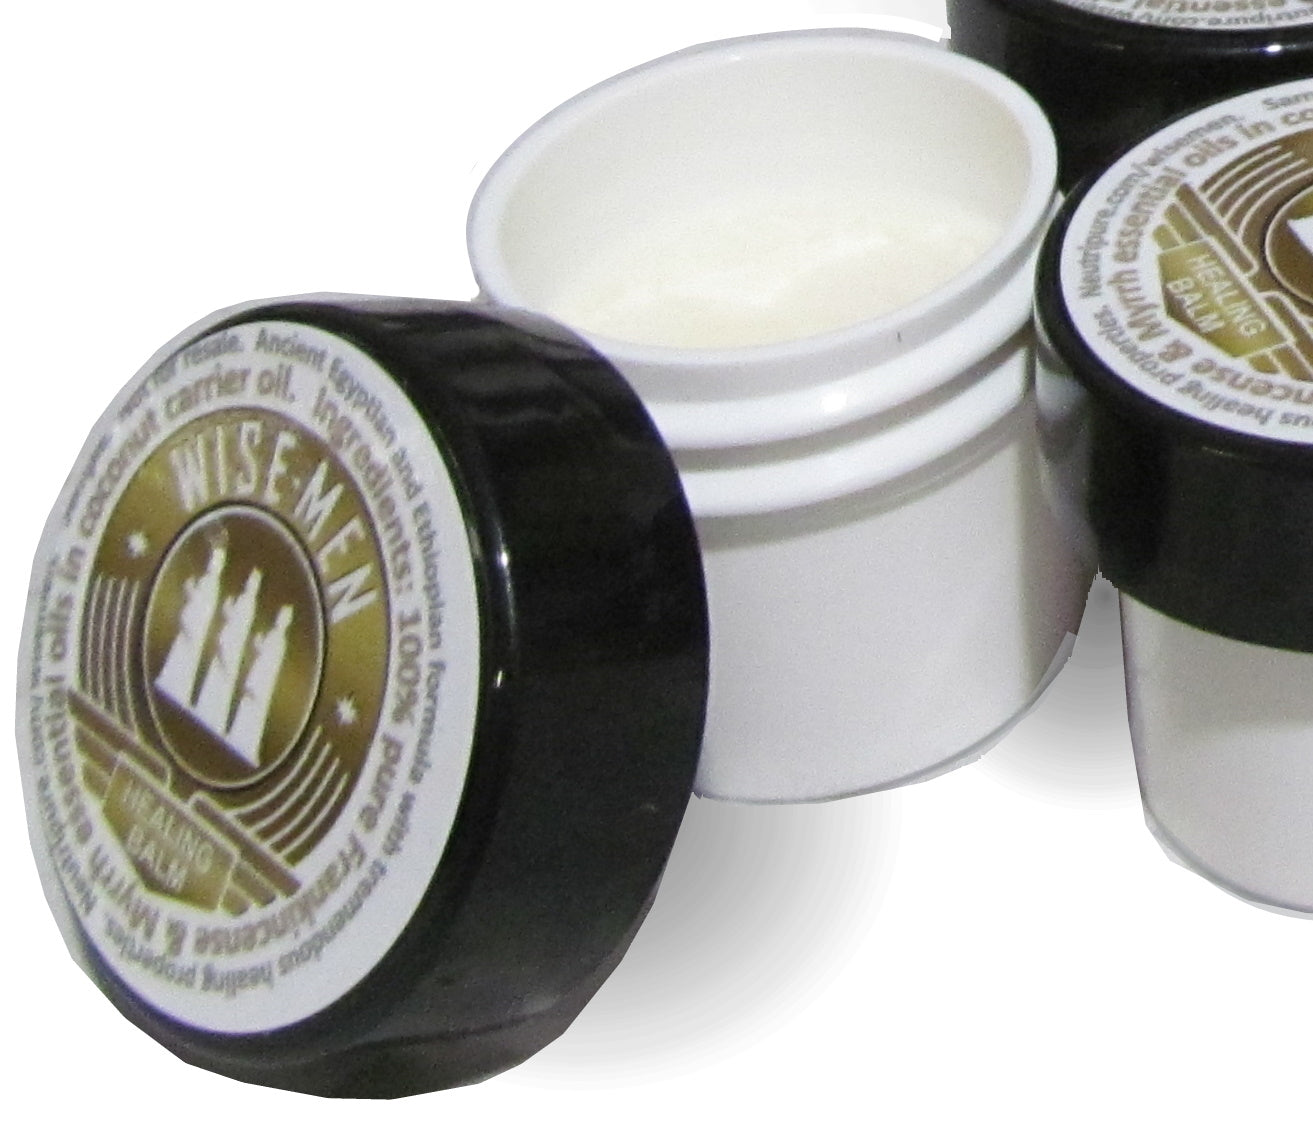 Wise Men Eczema Balm - Skin Soothing - with Chamomile and Lavender Ess – Wise  Men Healing